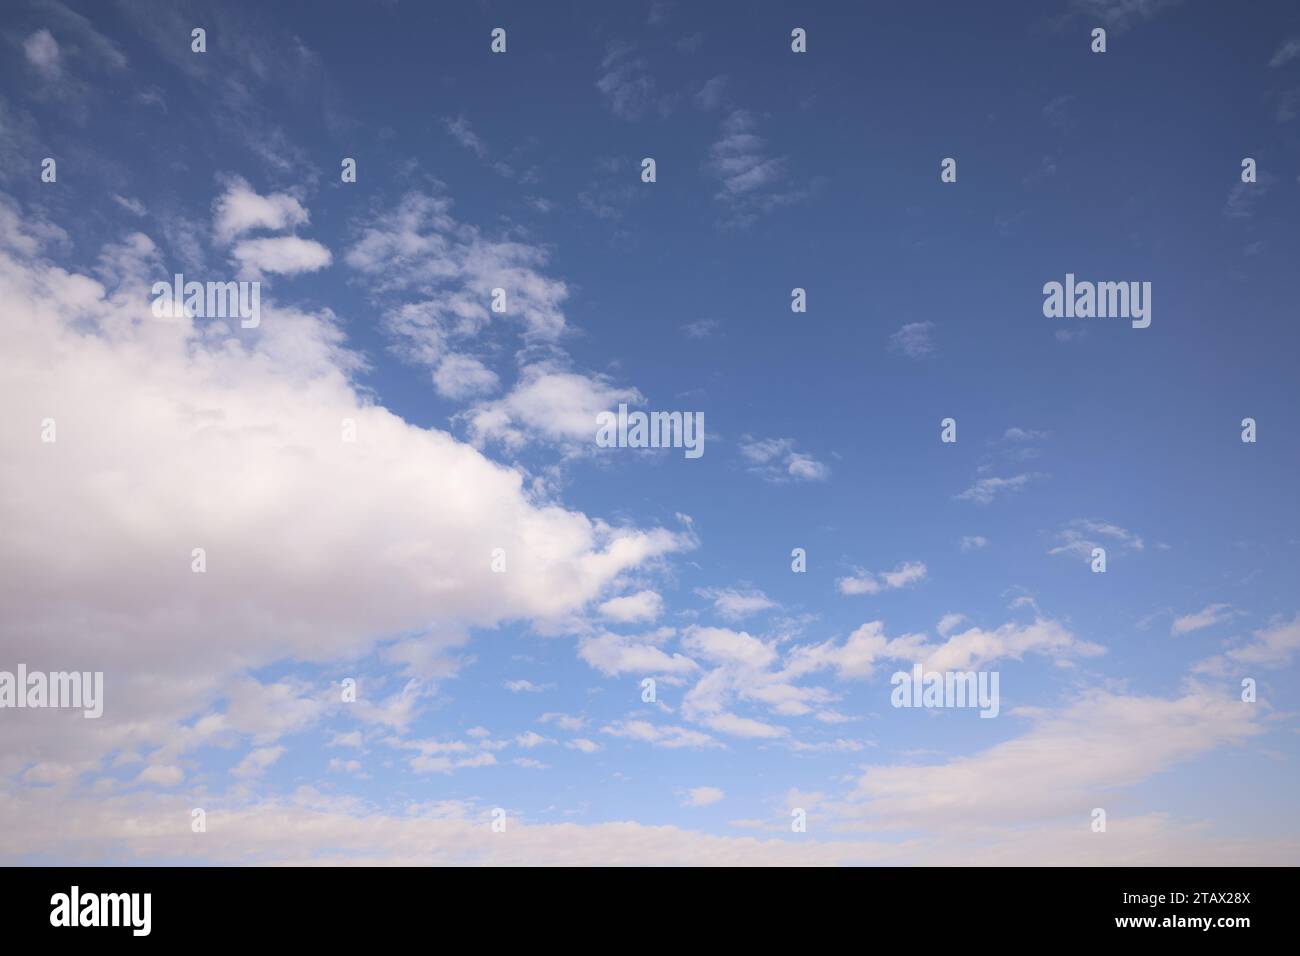 Blue sky with clouds | A sky with blue hues adorned by fluffy white clouds. Stock Photo